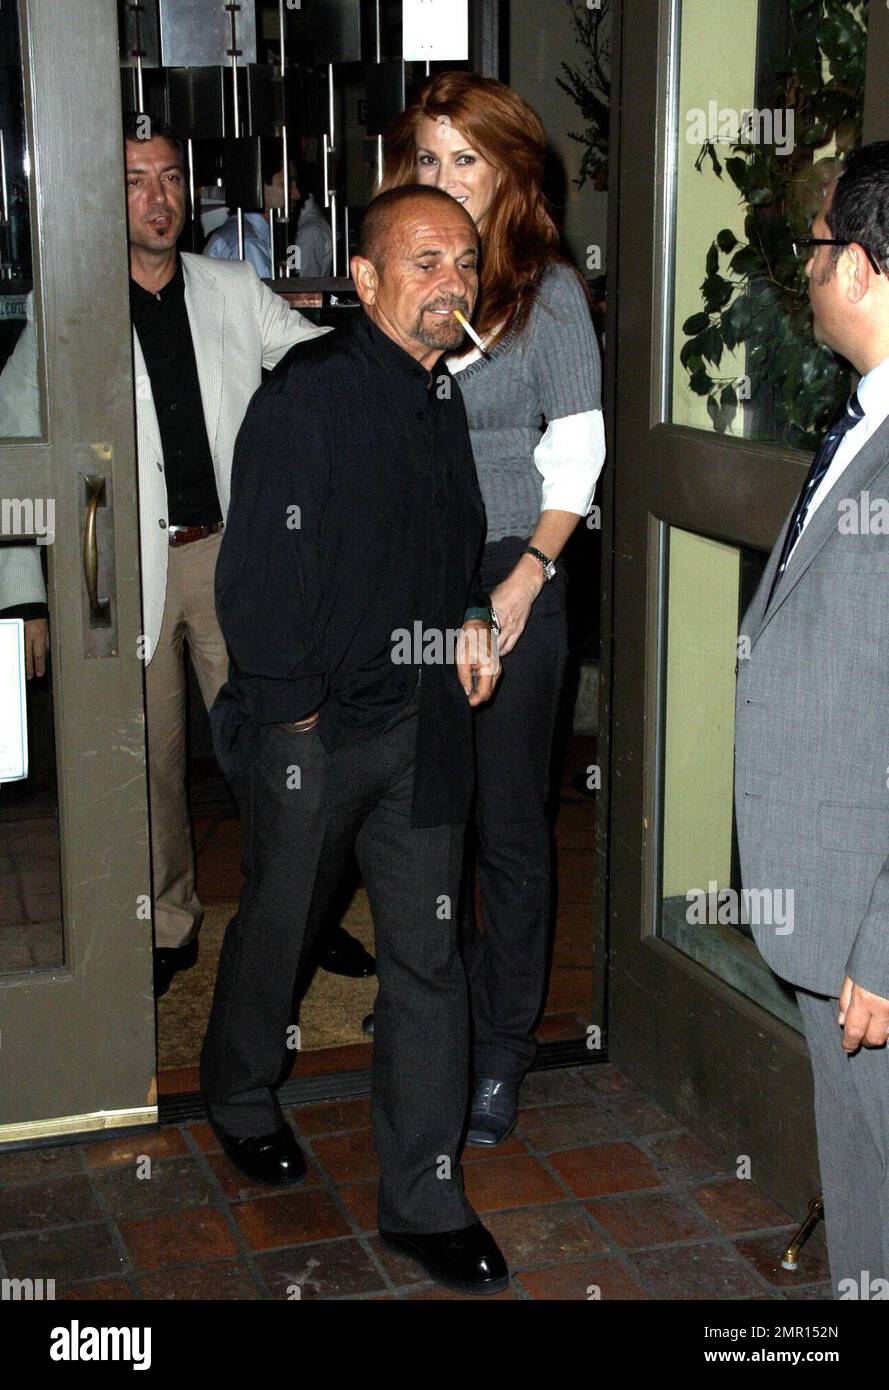 Exclusive!! It looks as if Angie Everhart and Joe Pesci are back together again as they leave the restaurant Ago. Everhart has reportedly accused ex-boyfriend, actor Chad Stansbury, of violently choking her during an incident in August. But, according to the reports, the LA County District Attorney rejected the case after it decided there wasn't enough evidence to prosecute. Angie told the cops that Stansbury choked her during a heated argument and fled the scene. He was then arrested and booked on suspicion of domestic violence. Los Angeles, CA. 10/2/08. Stock Photo